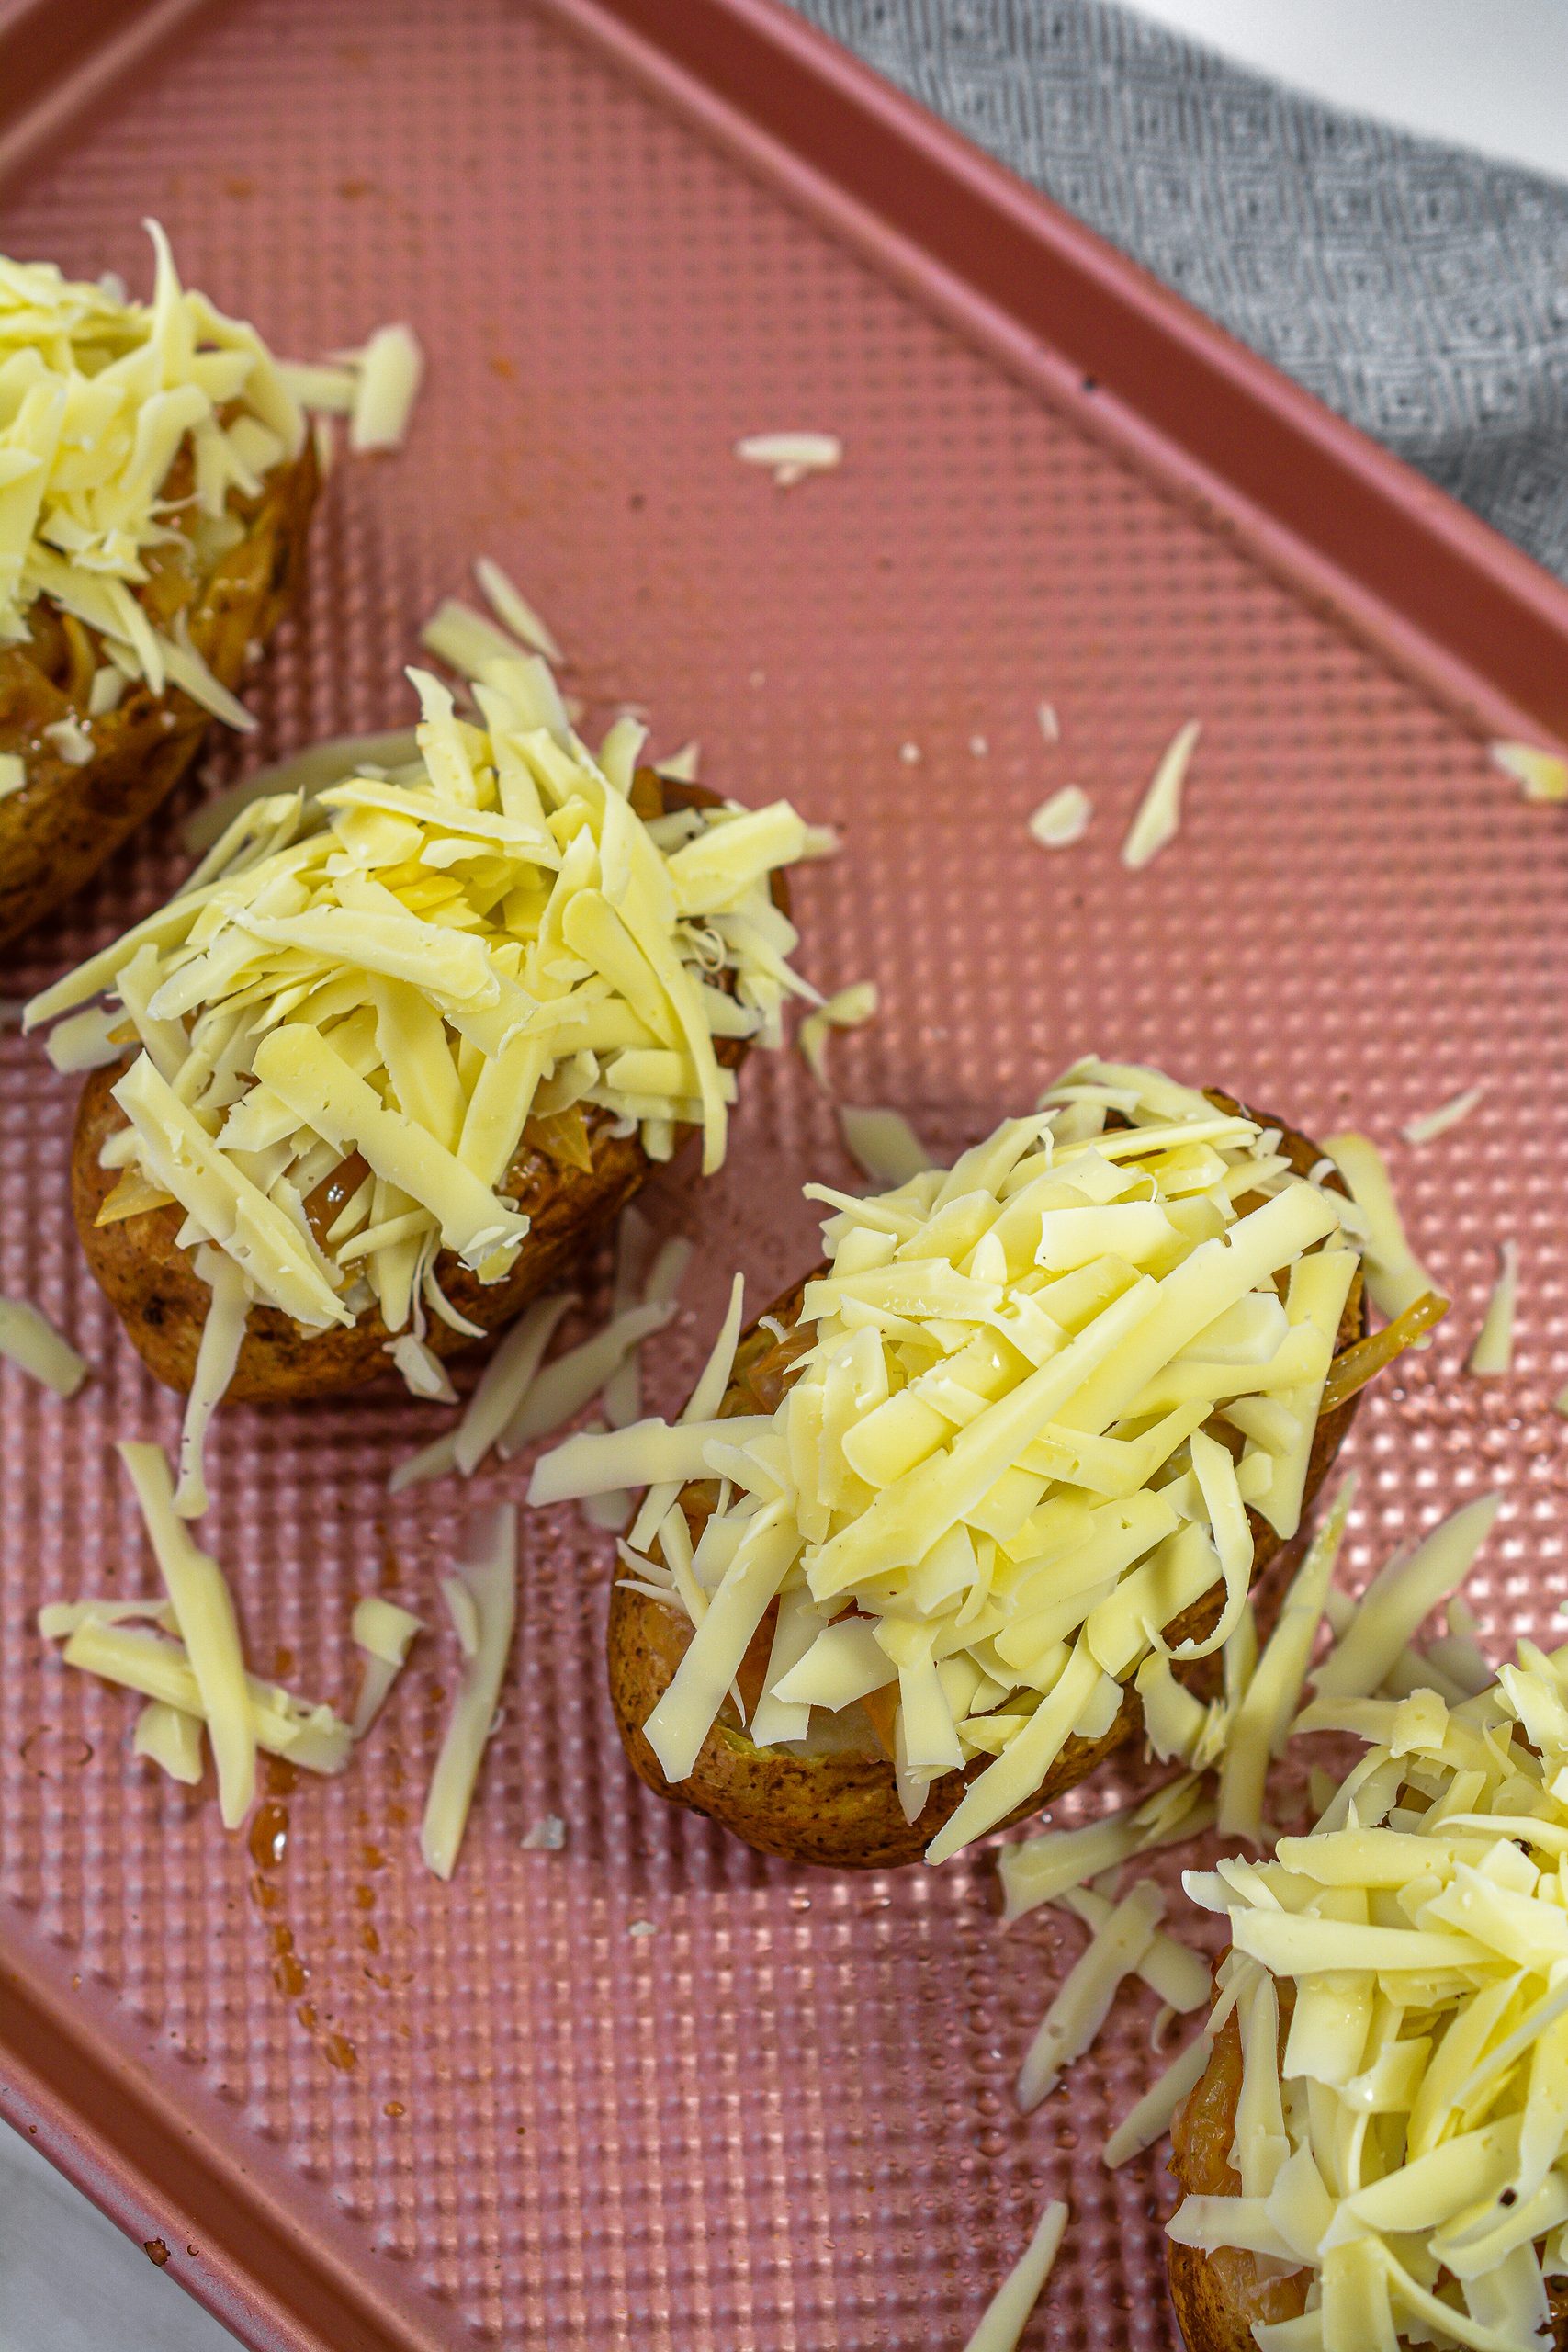 Stuff the potatoes with the filling and top with the remaining onion mixture and shredded cheese.